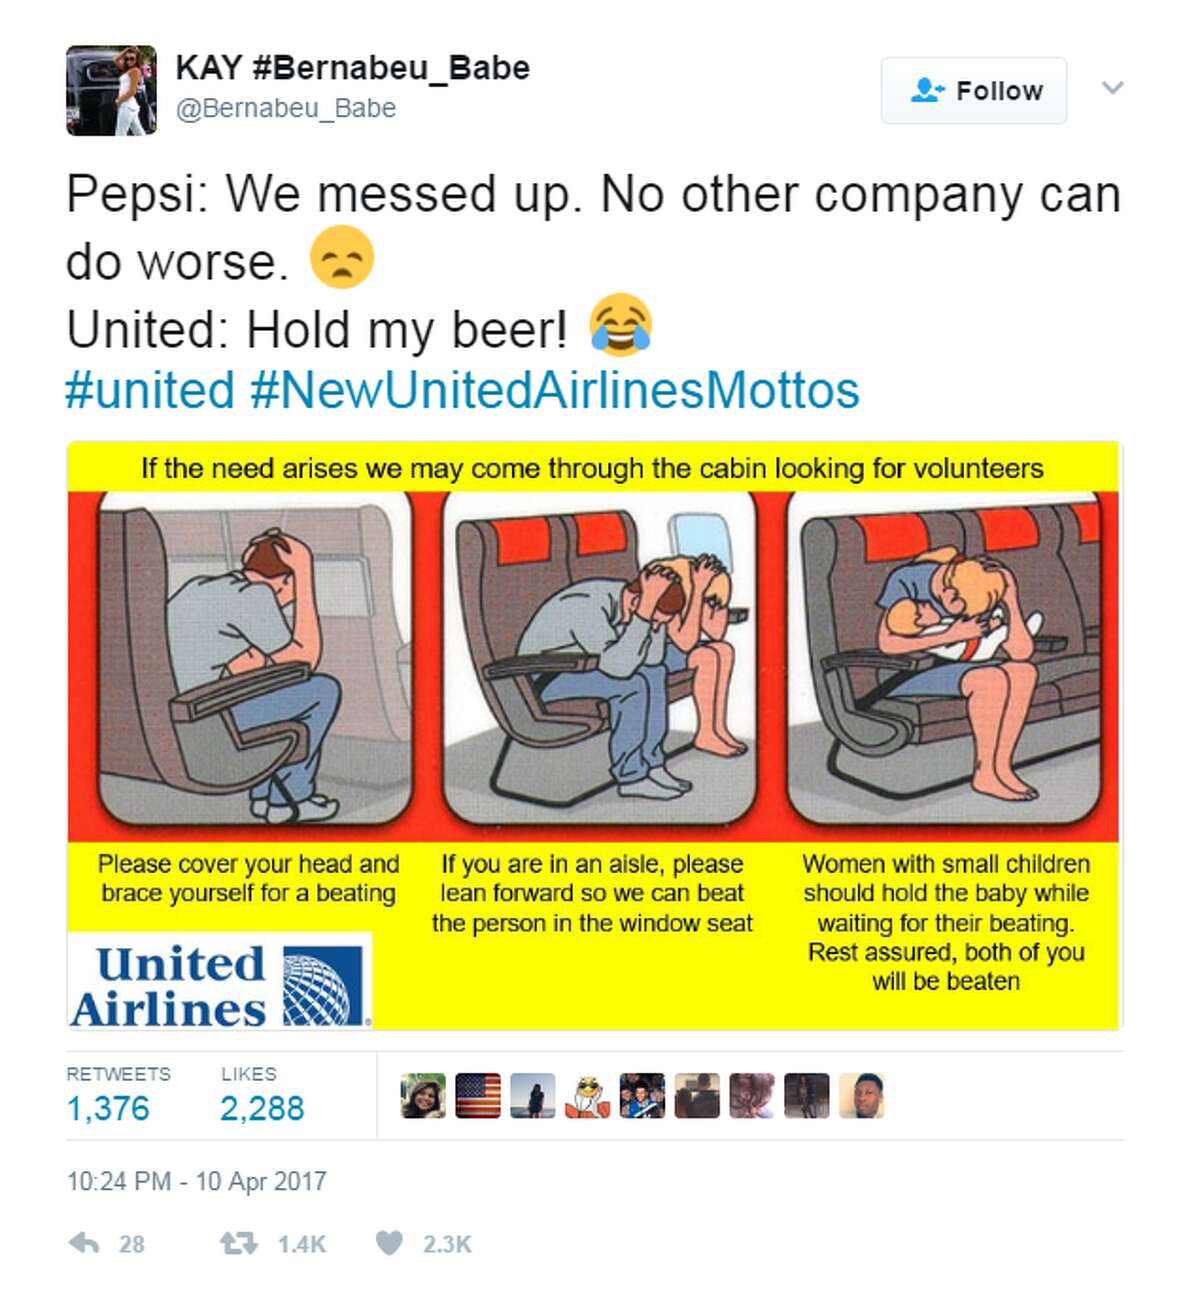 On United Airlines' treatment of costumers @Bernabeu_Babe